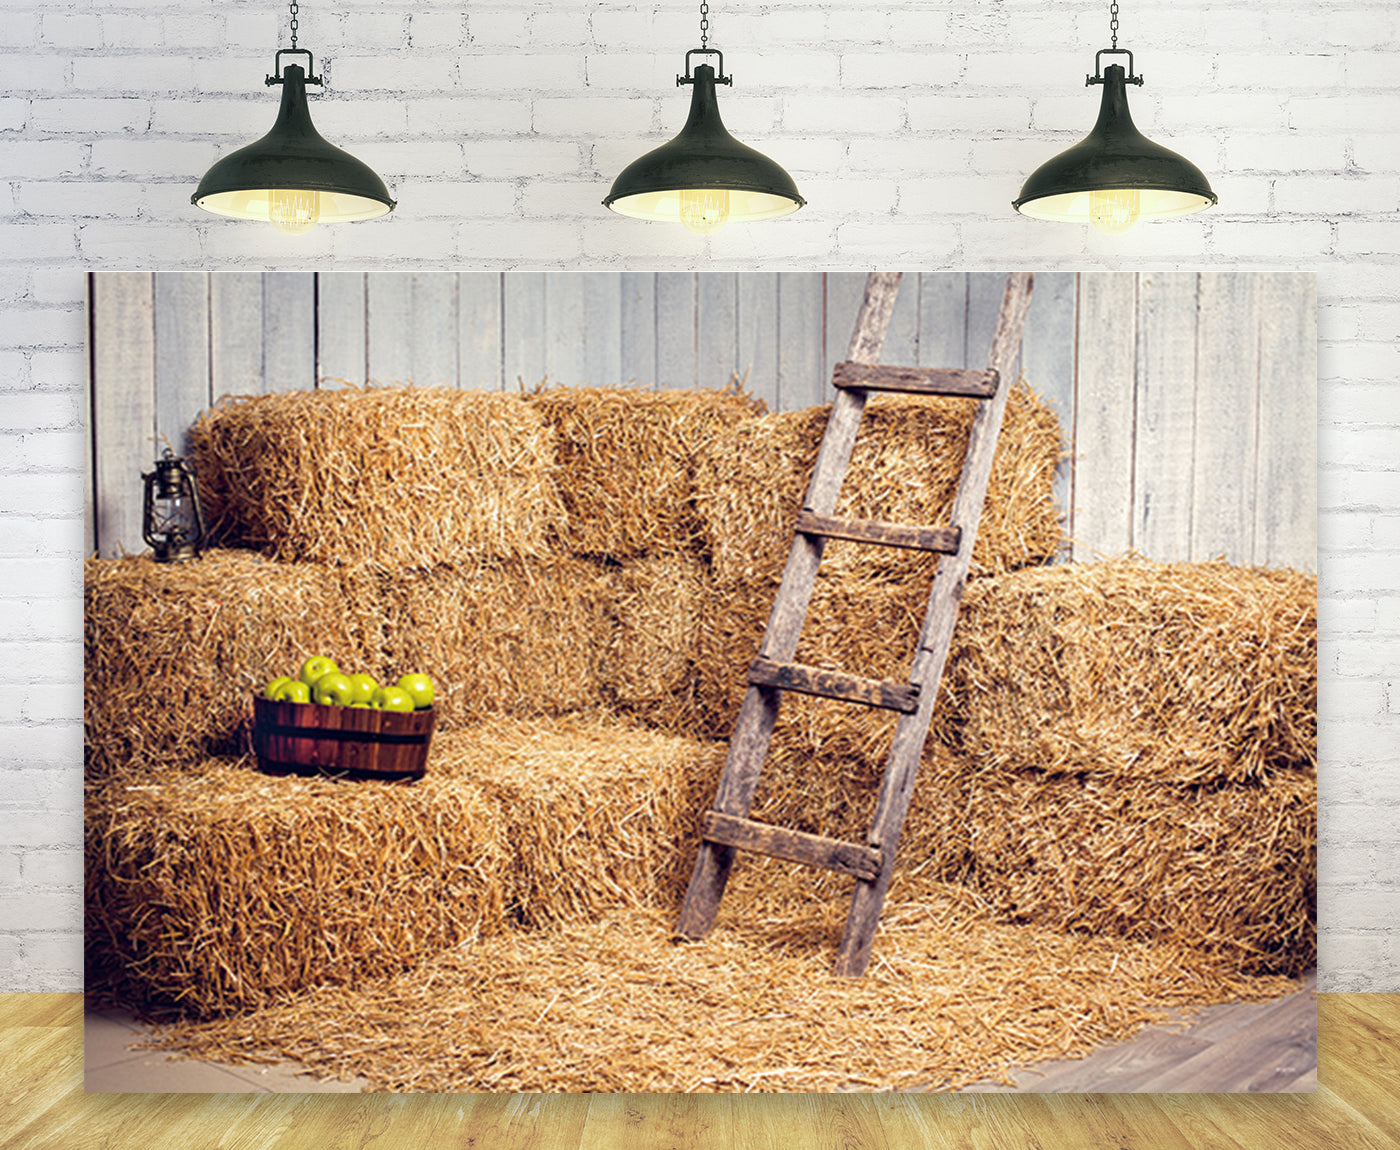 Wooden Straw Autumn Photography Backdrop